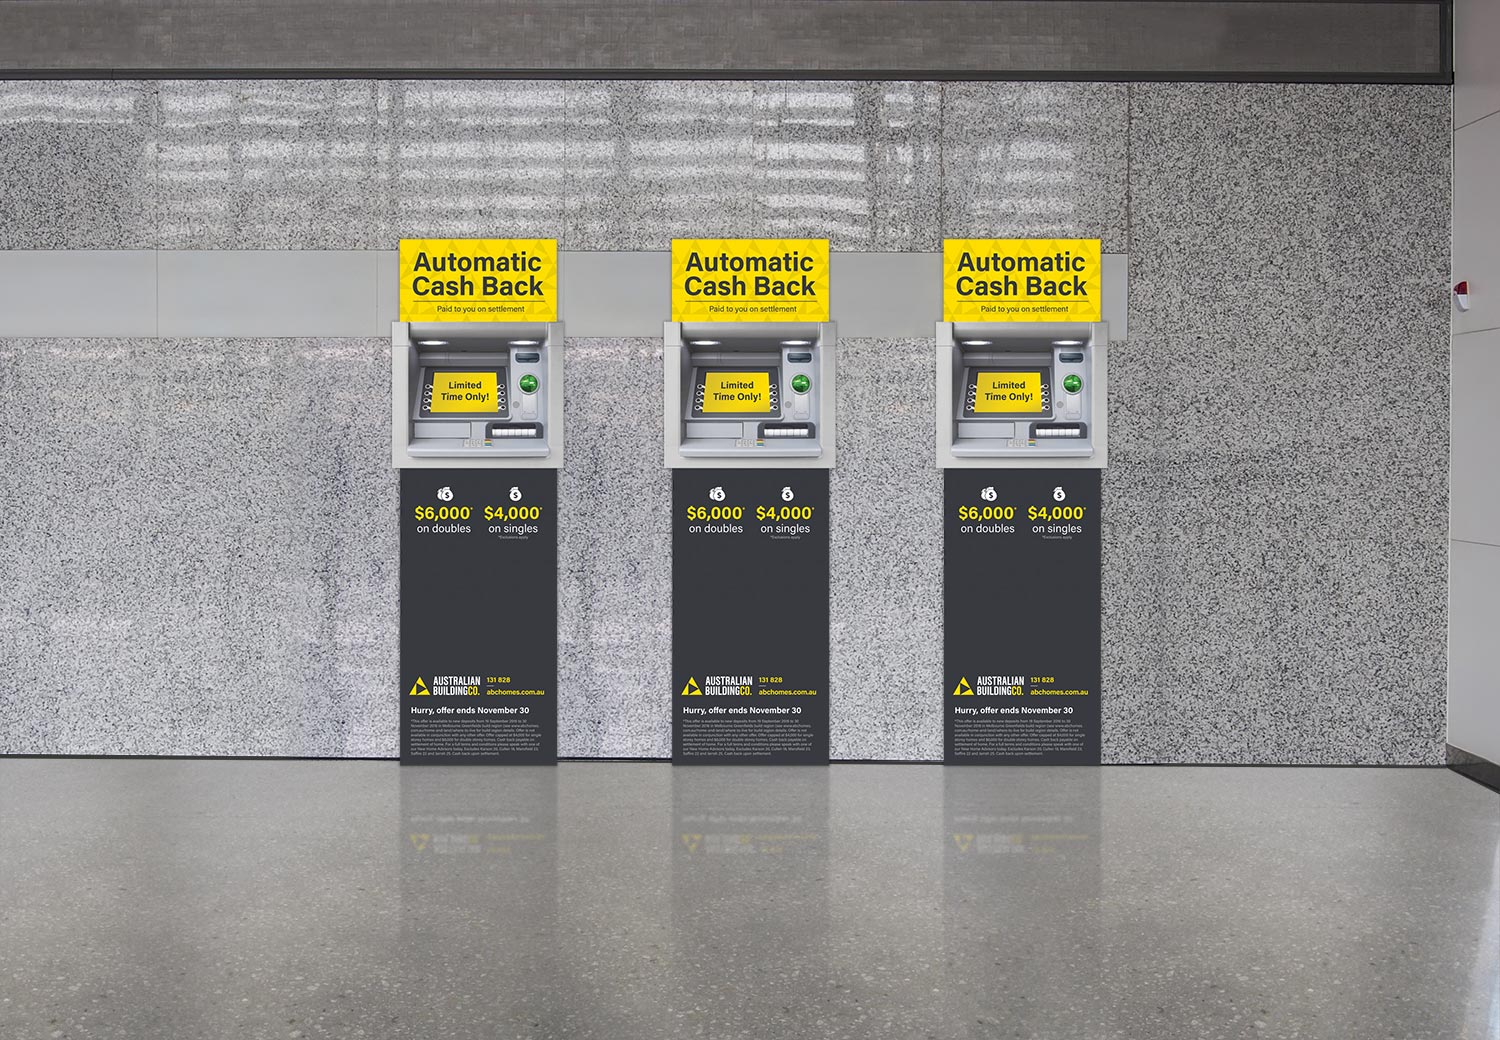 Australian Building Company - Campaign: Automatic Cash Back | ATM visual for Point of Sale